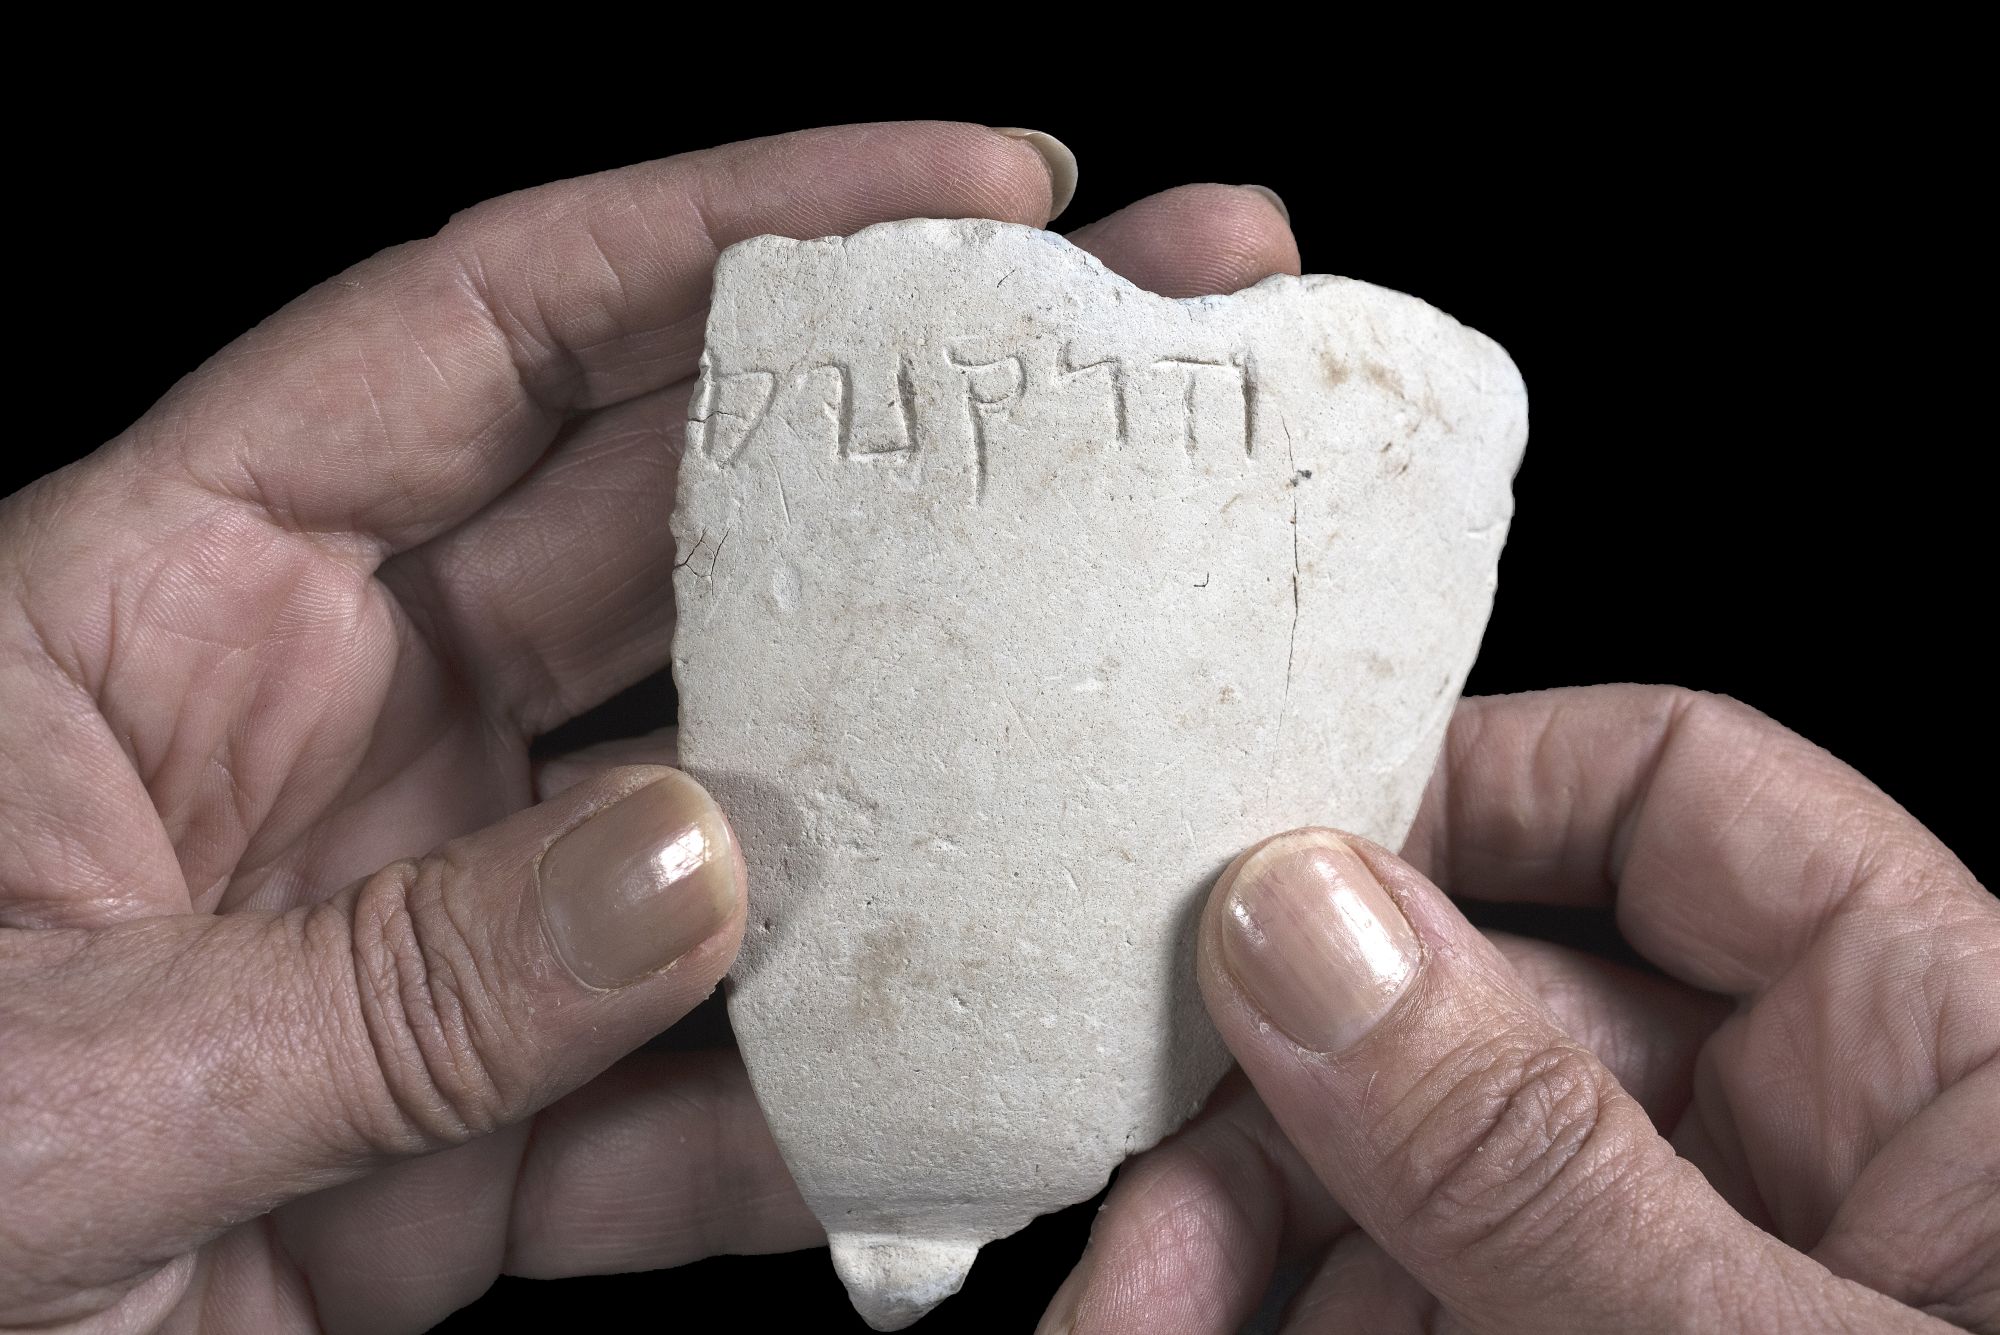 a-fragment-of-the-chalk-bowl-from-the-hasmonean-period-which-is-engraved-with-the-name-hyrcanus